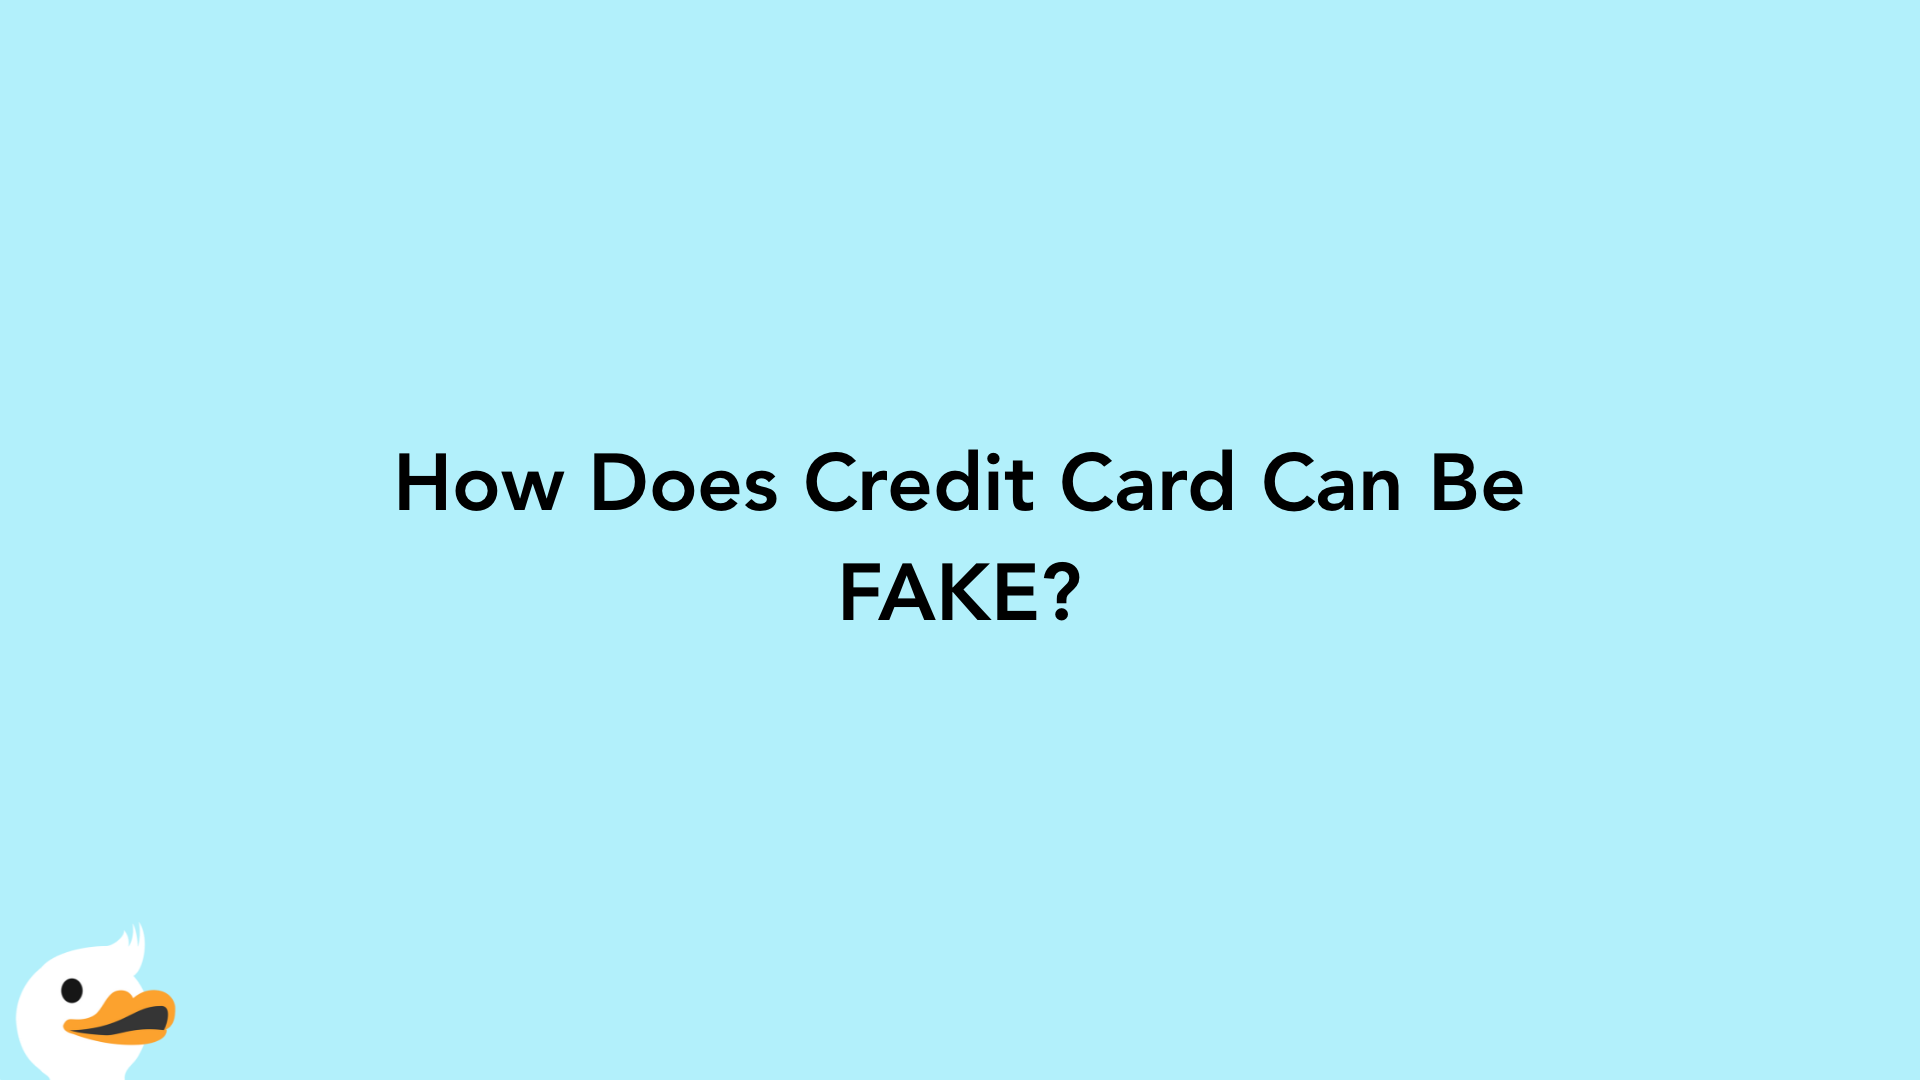 How Does Credit Card Can Be FAKE?